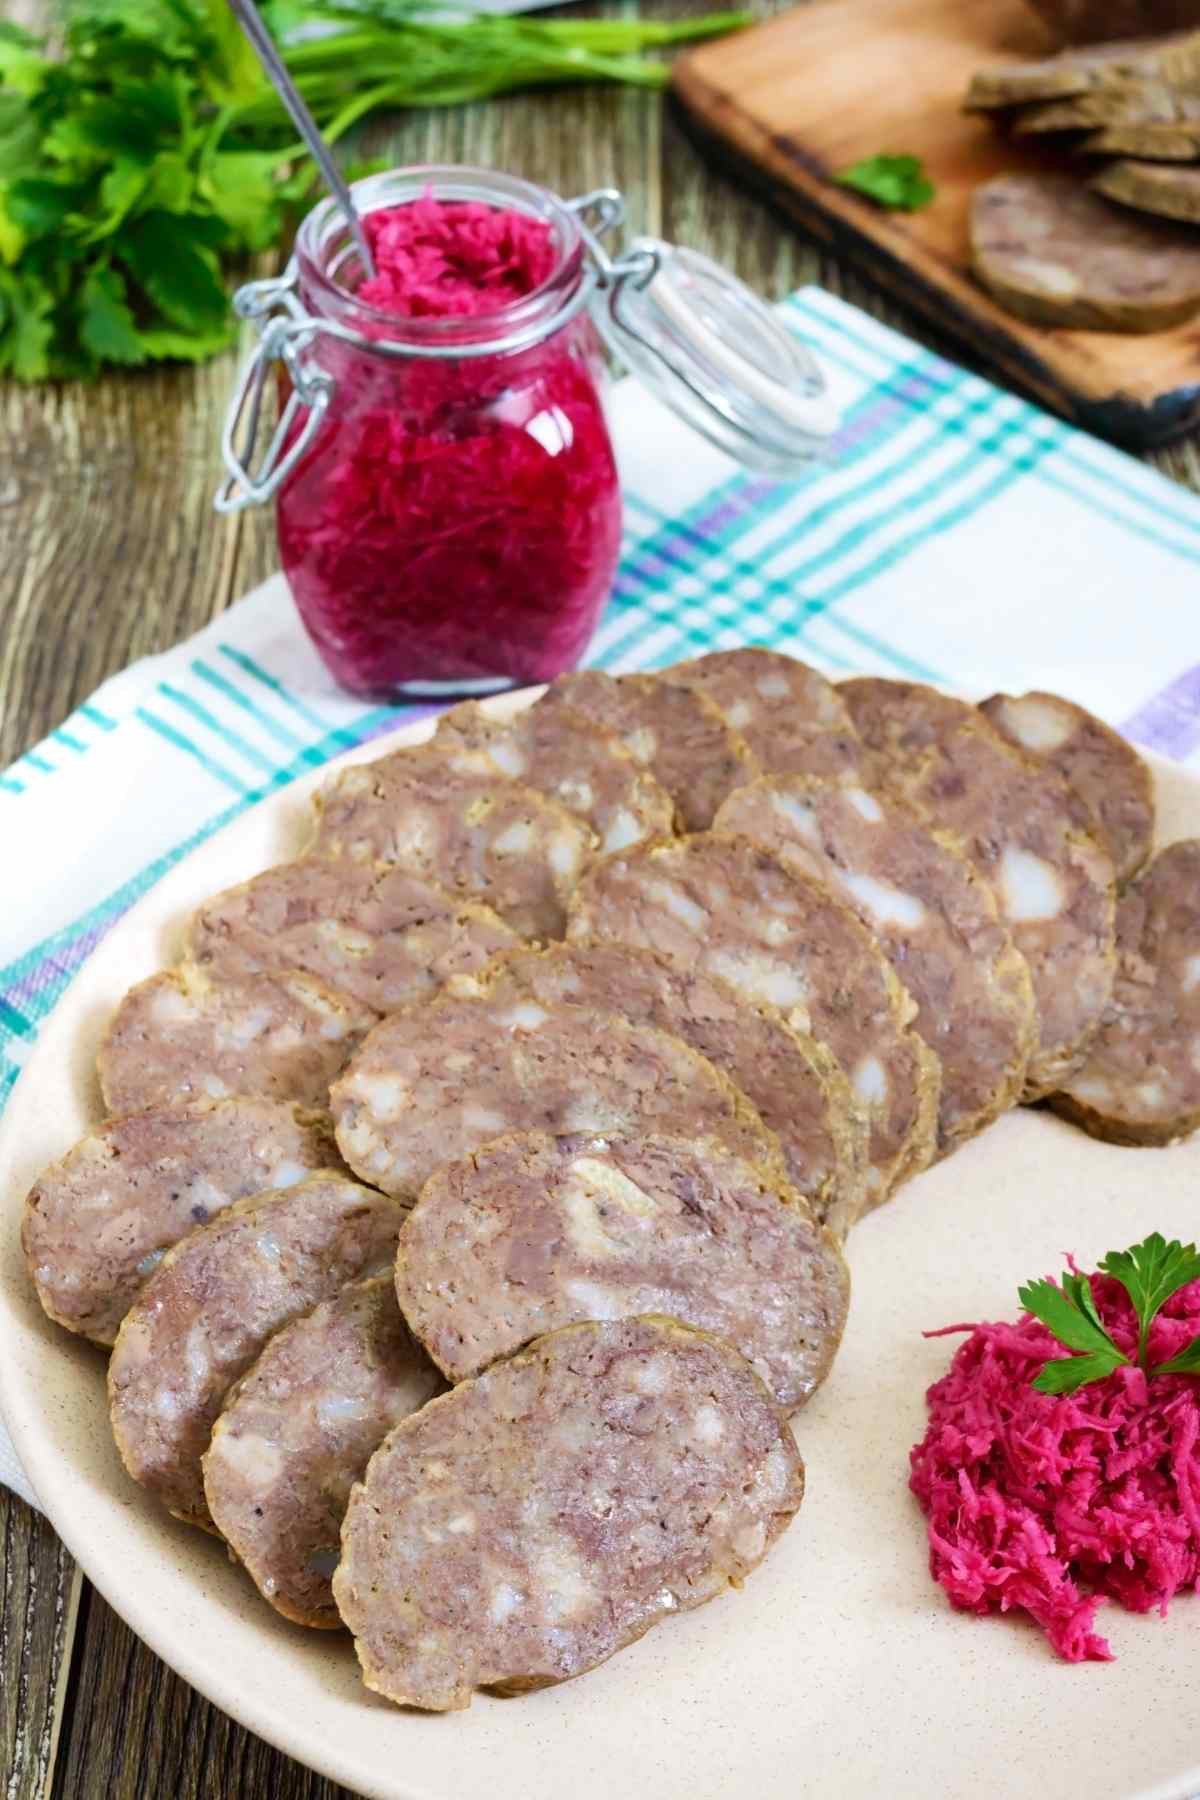 Braunshweiger is a new kind of smoked sausage that hails from Germany and is made from liver. Often confused with liverwurst, Braunshweiger is also soft and spreadable, just like pâté. You can use it to make different spreads and sandwiches for lunch or for dinner!